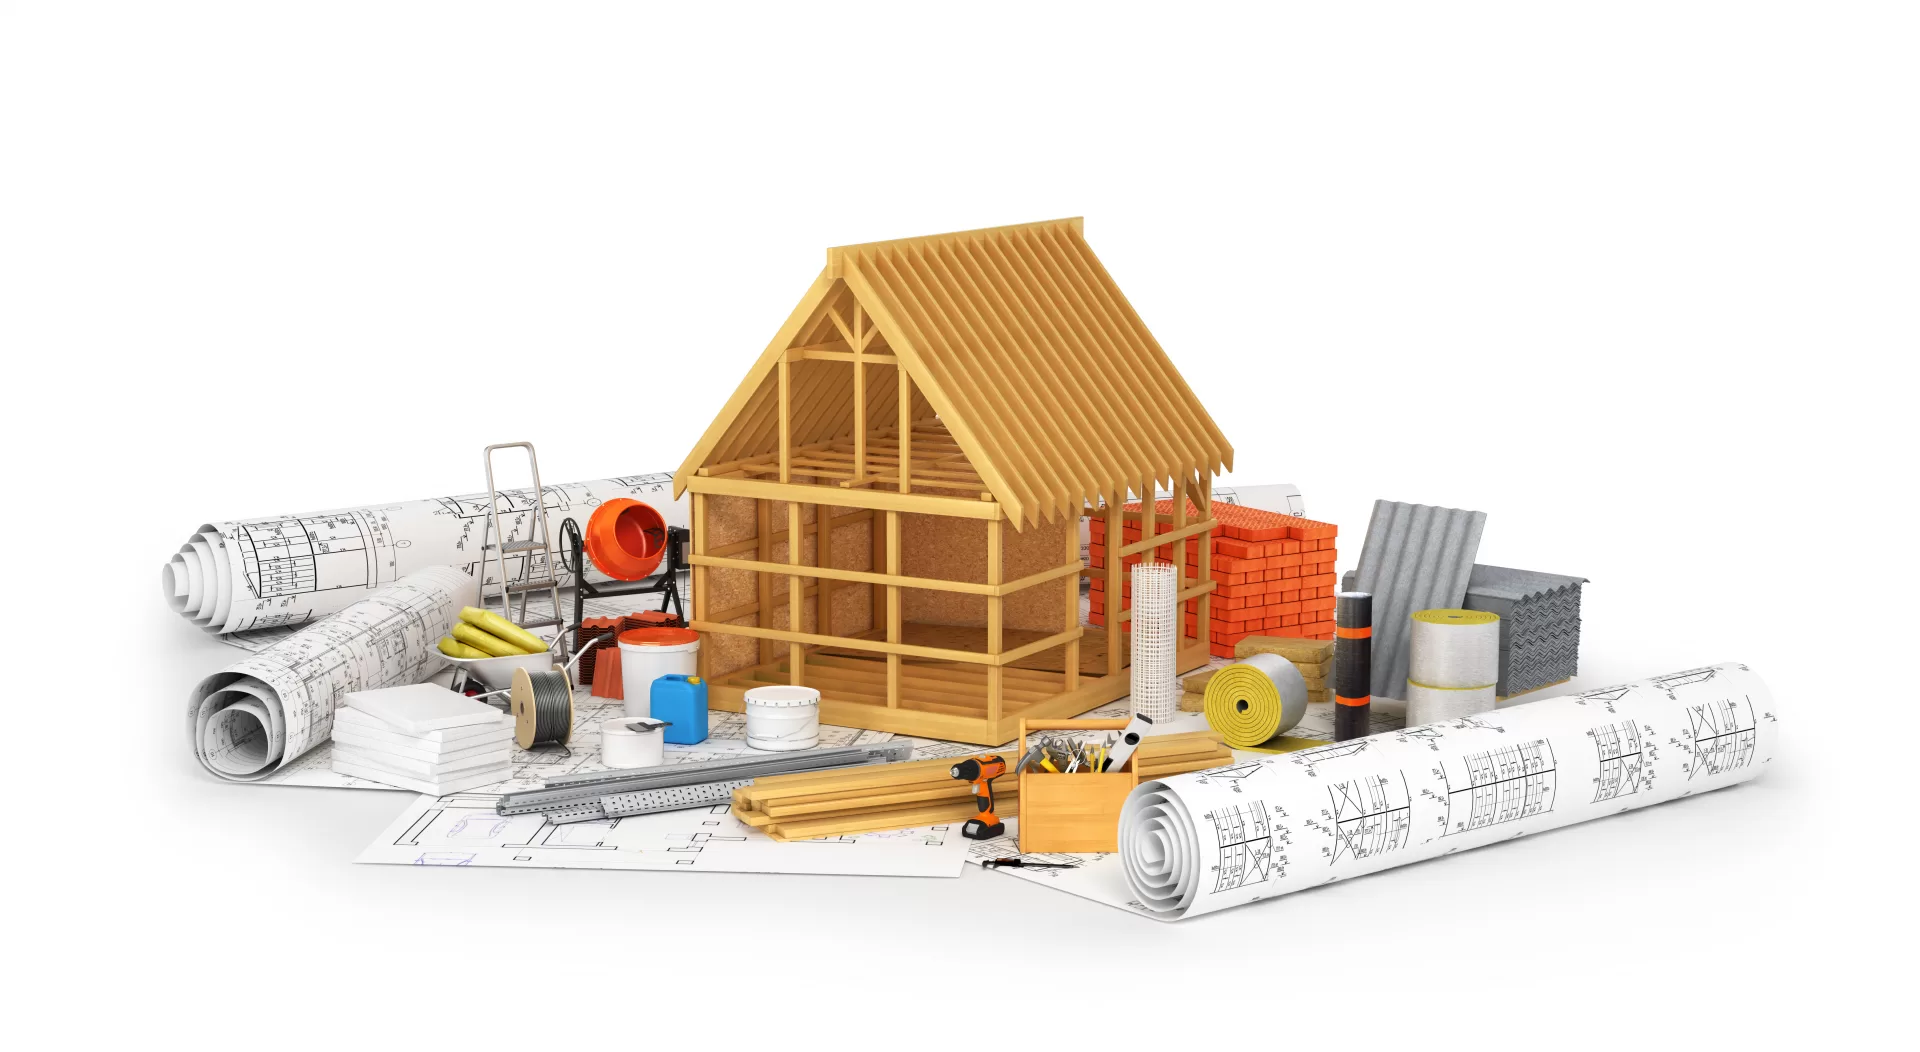 Construction materials, building of a wooden frame placed on the rolls of drawings isolated on white. 3D illustration